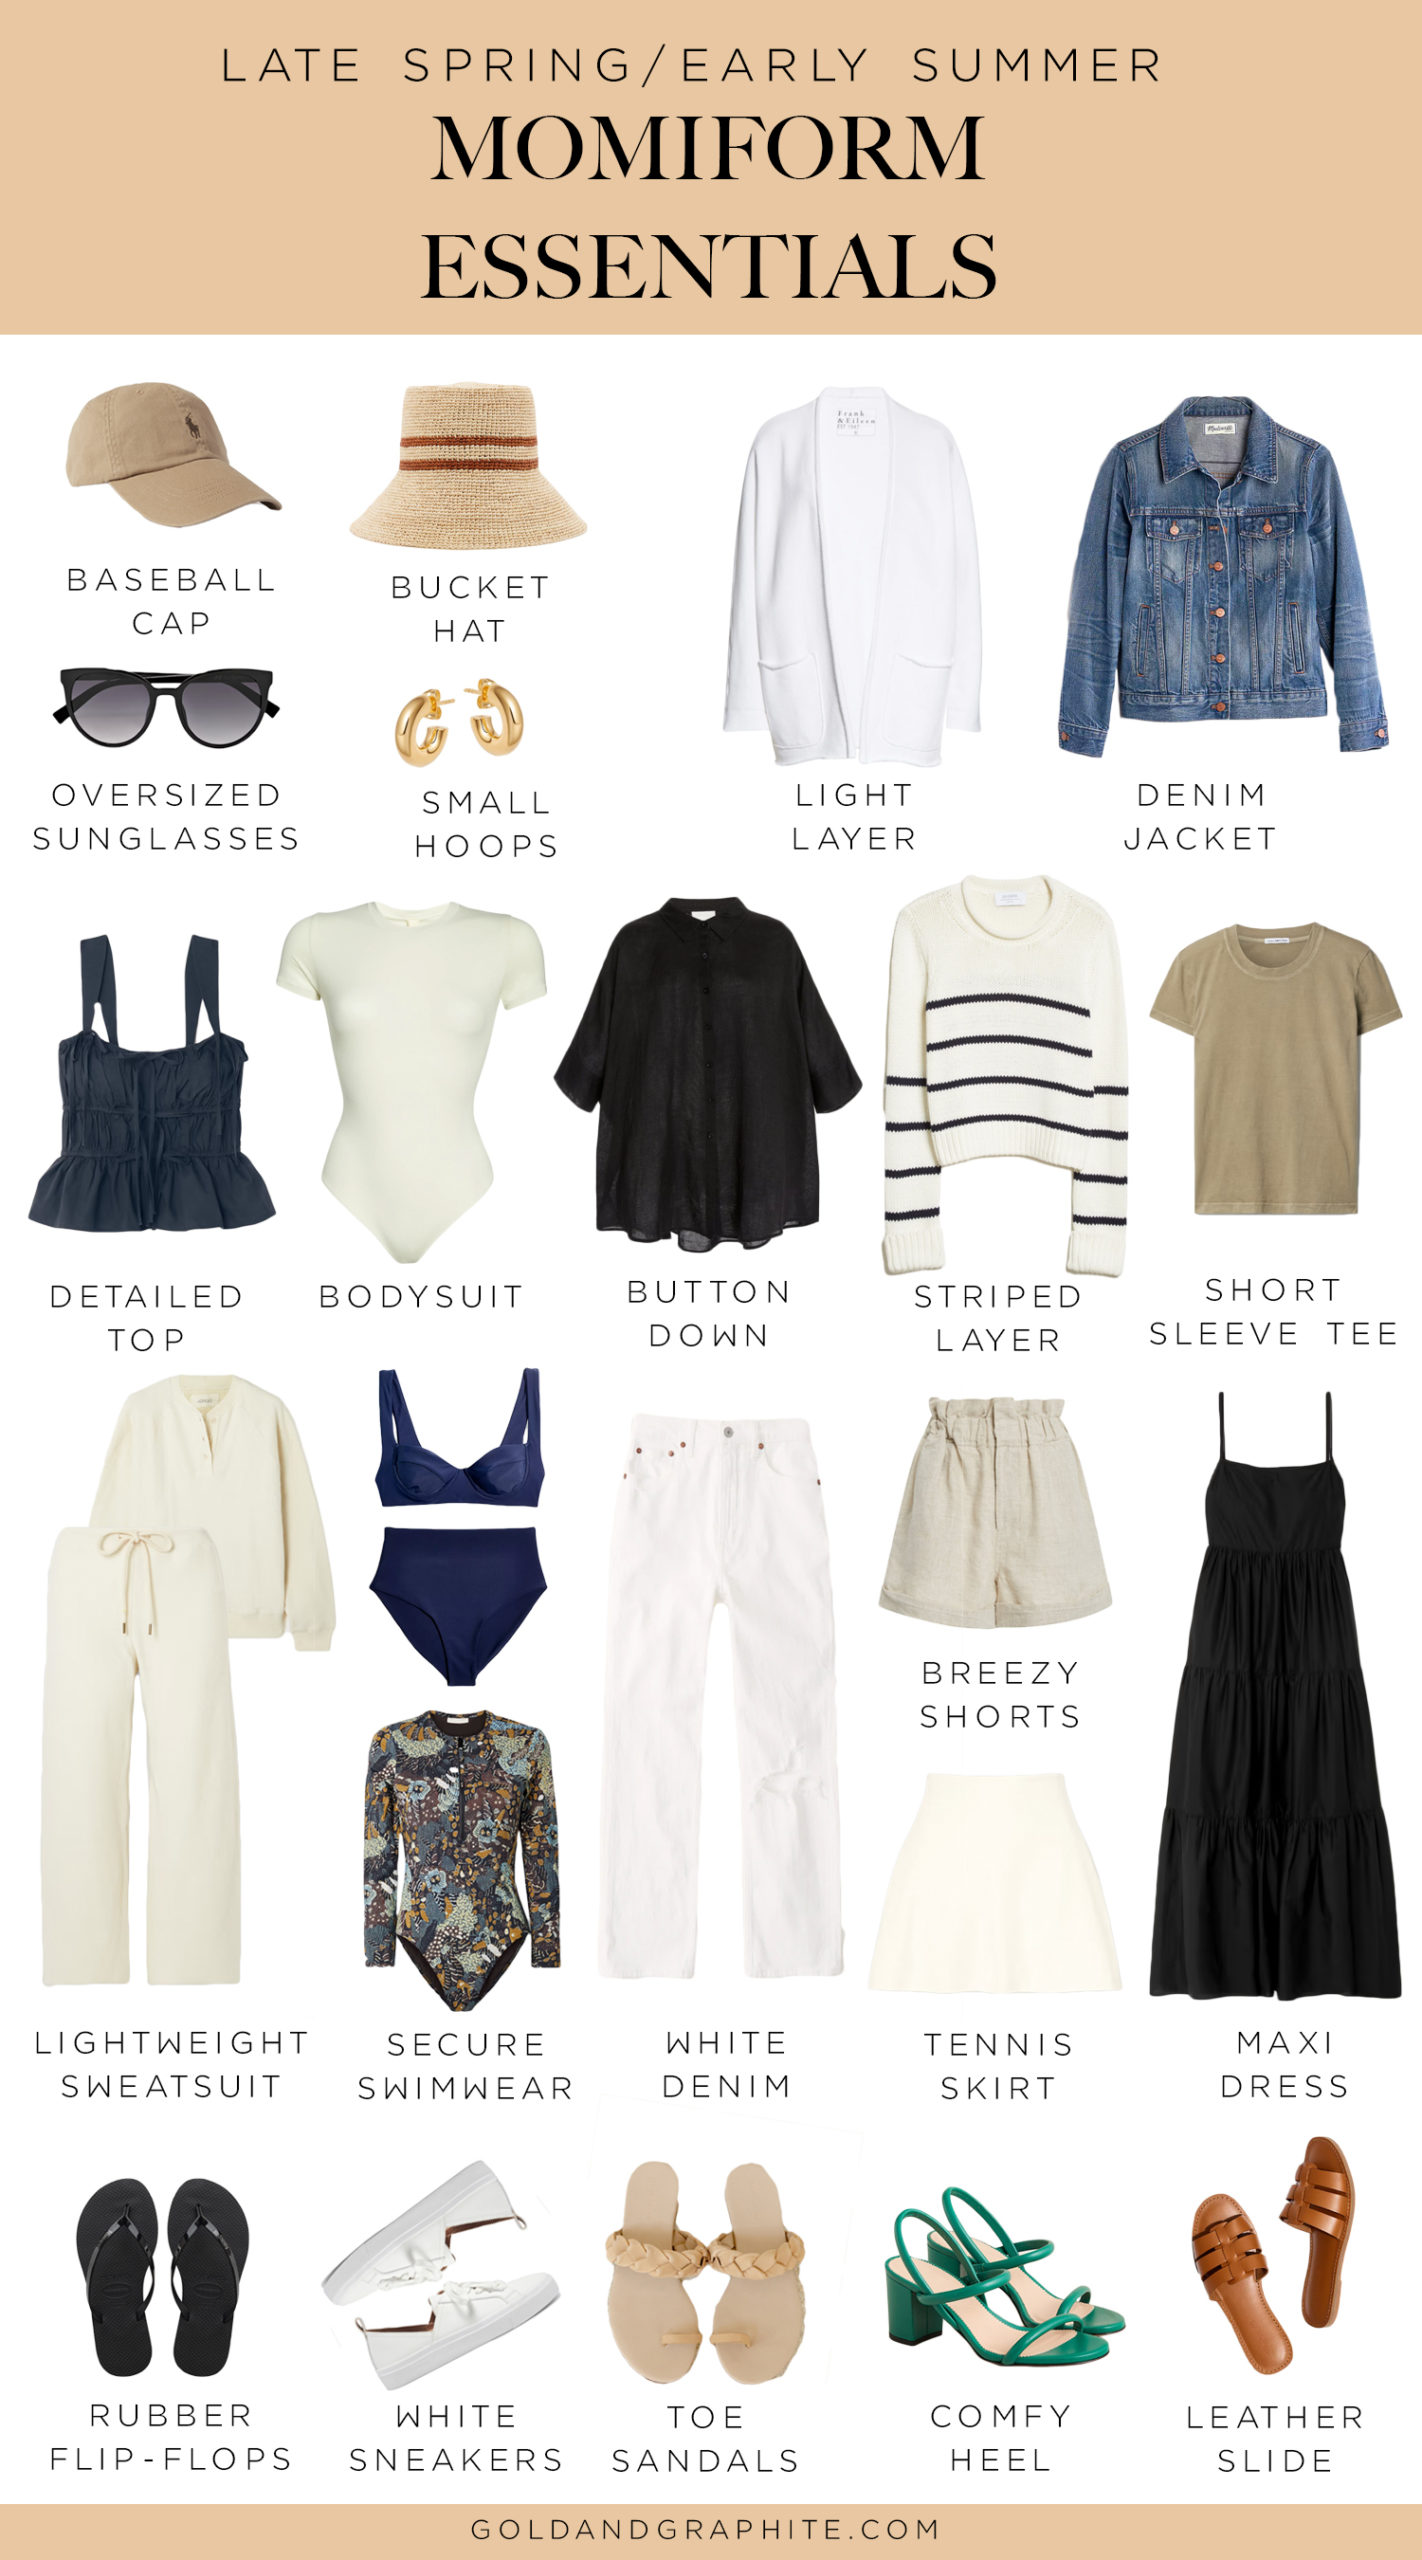 The Best Things for Your Closet: Late Spring/Early Summer Edition